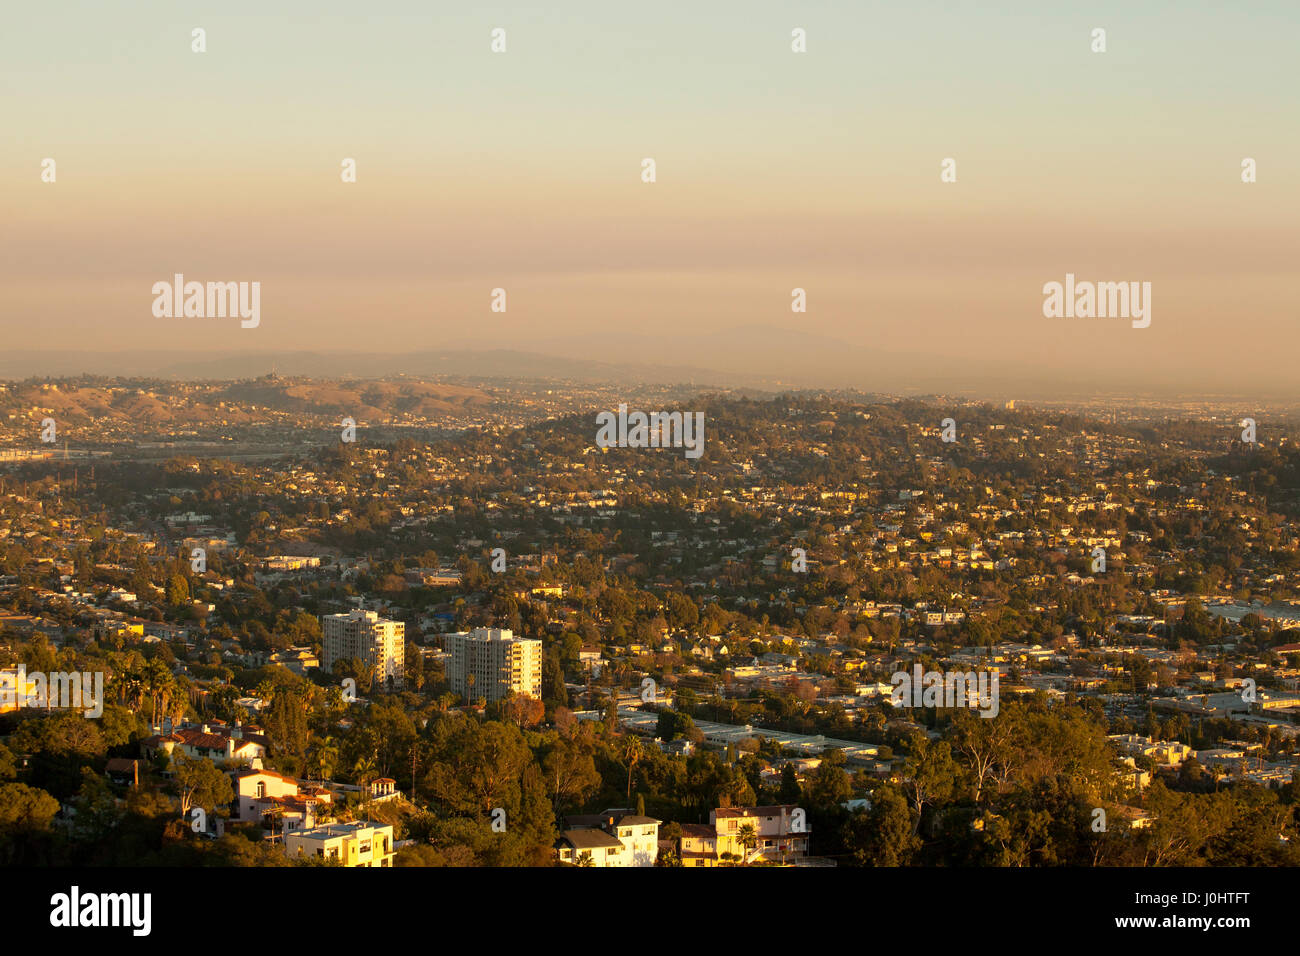 View towards the hilly Silverlake area of Los Angeles Stock Photo